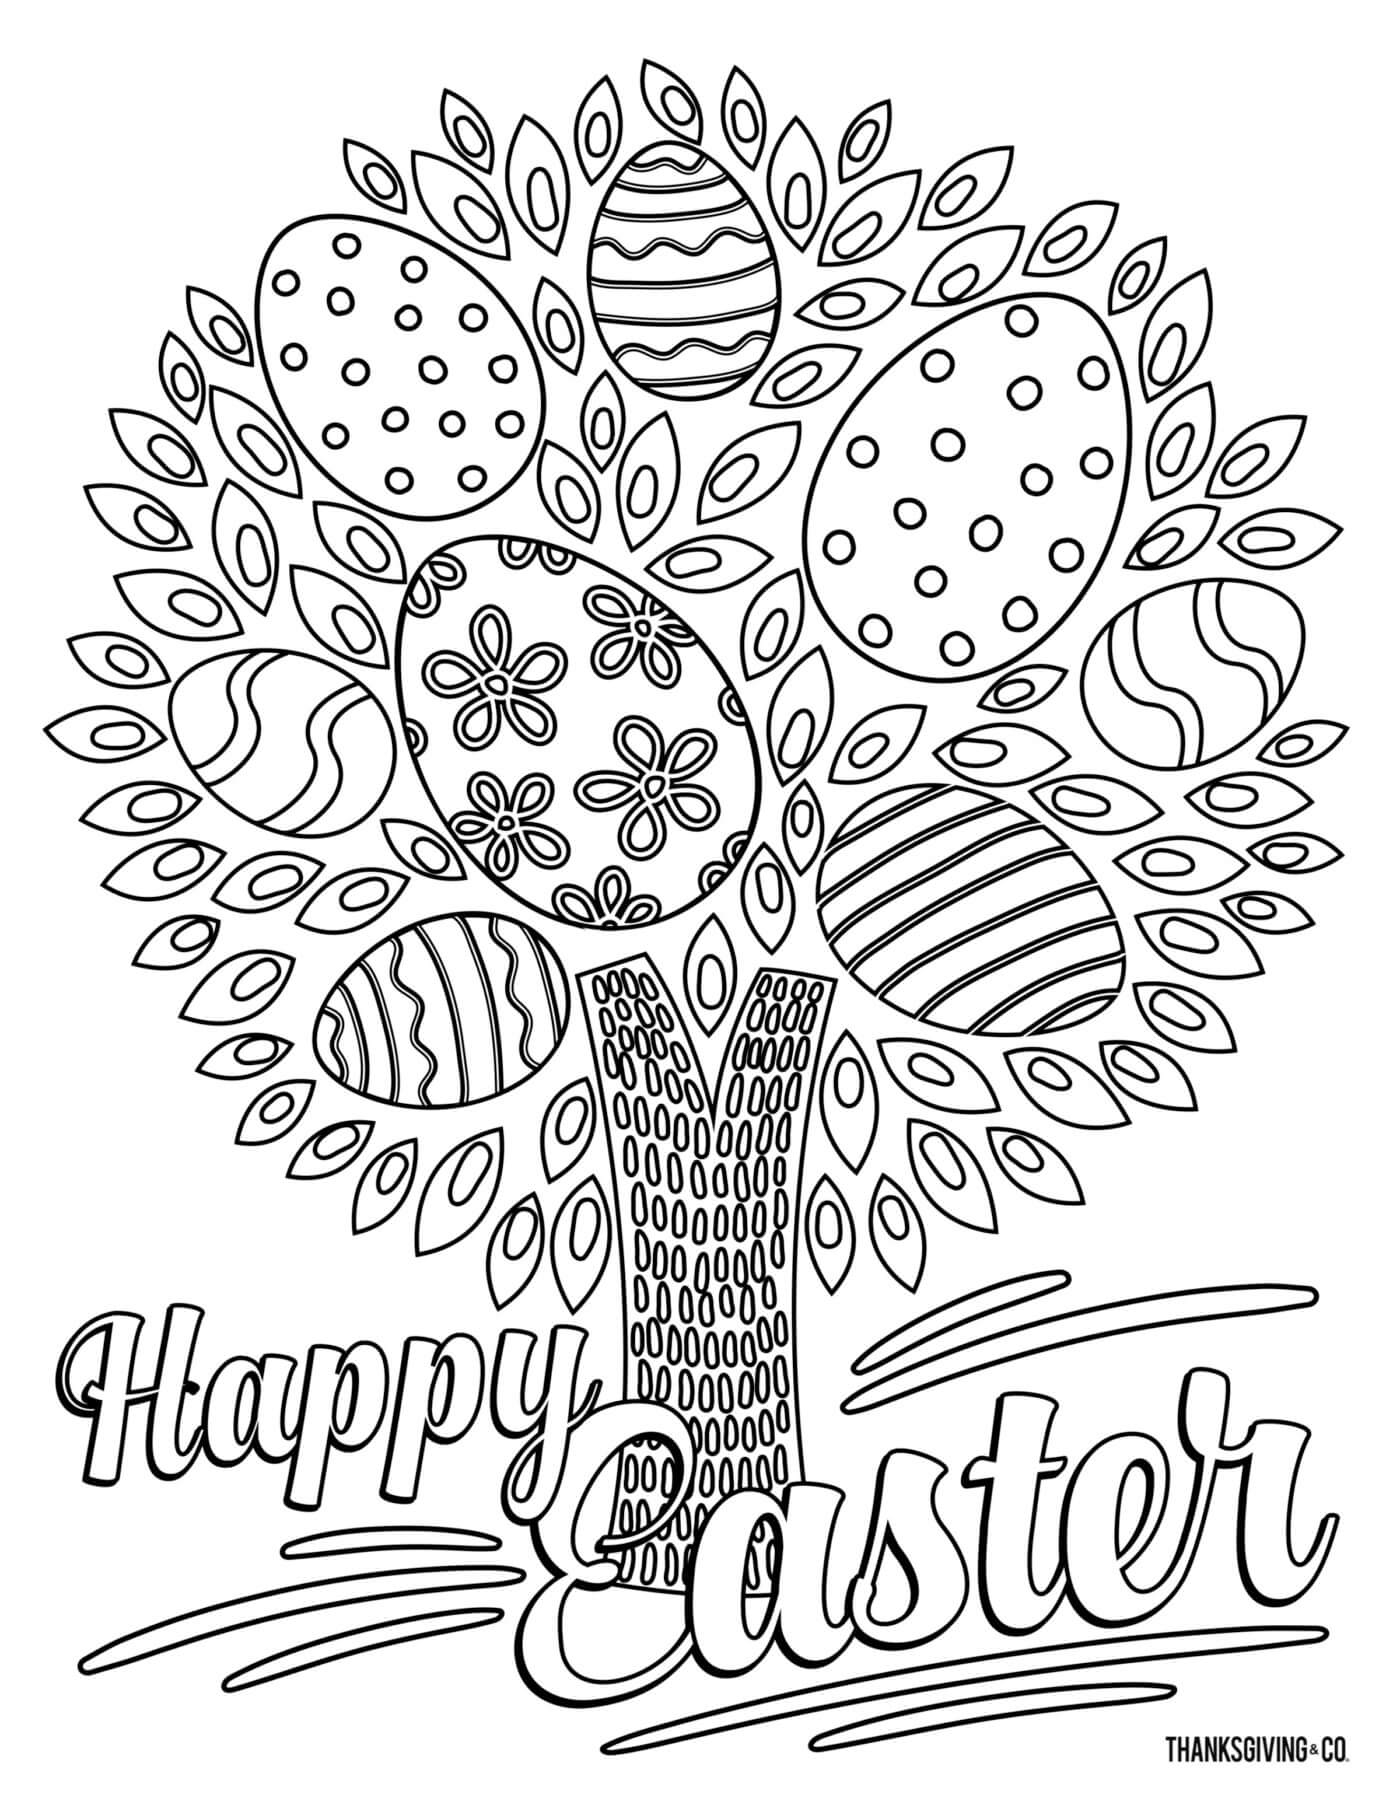 easter coloring pages for adults | free easter coloring pages for adults | free printable easter egg coloring pages for adults